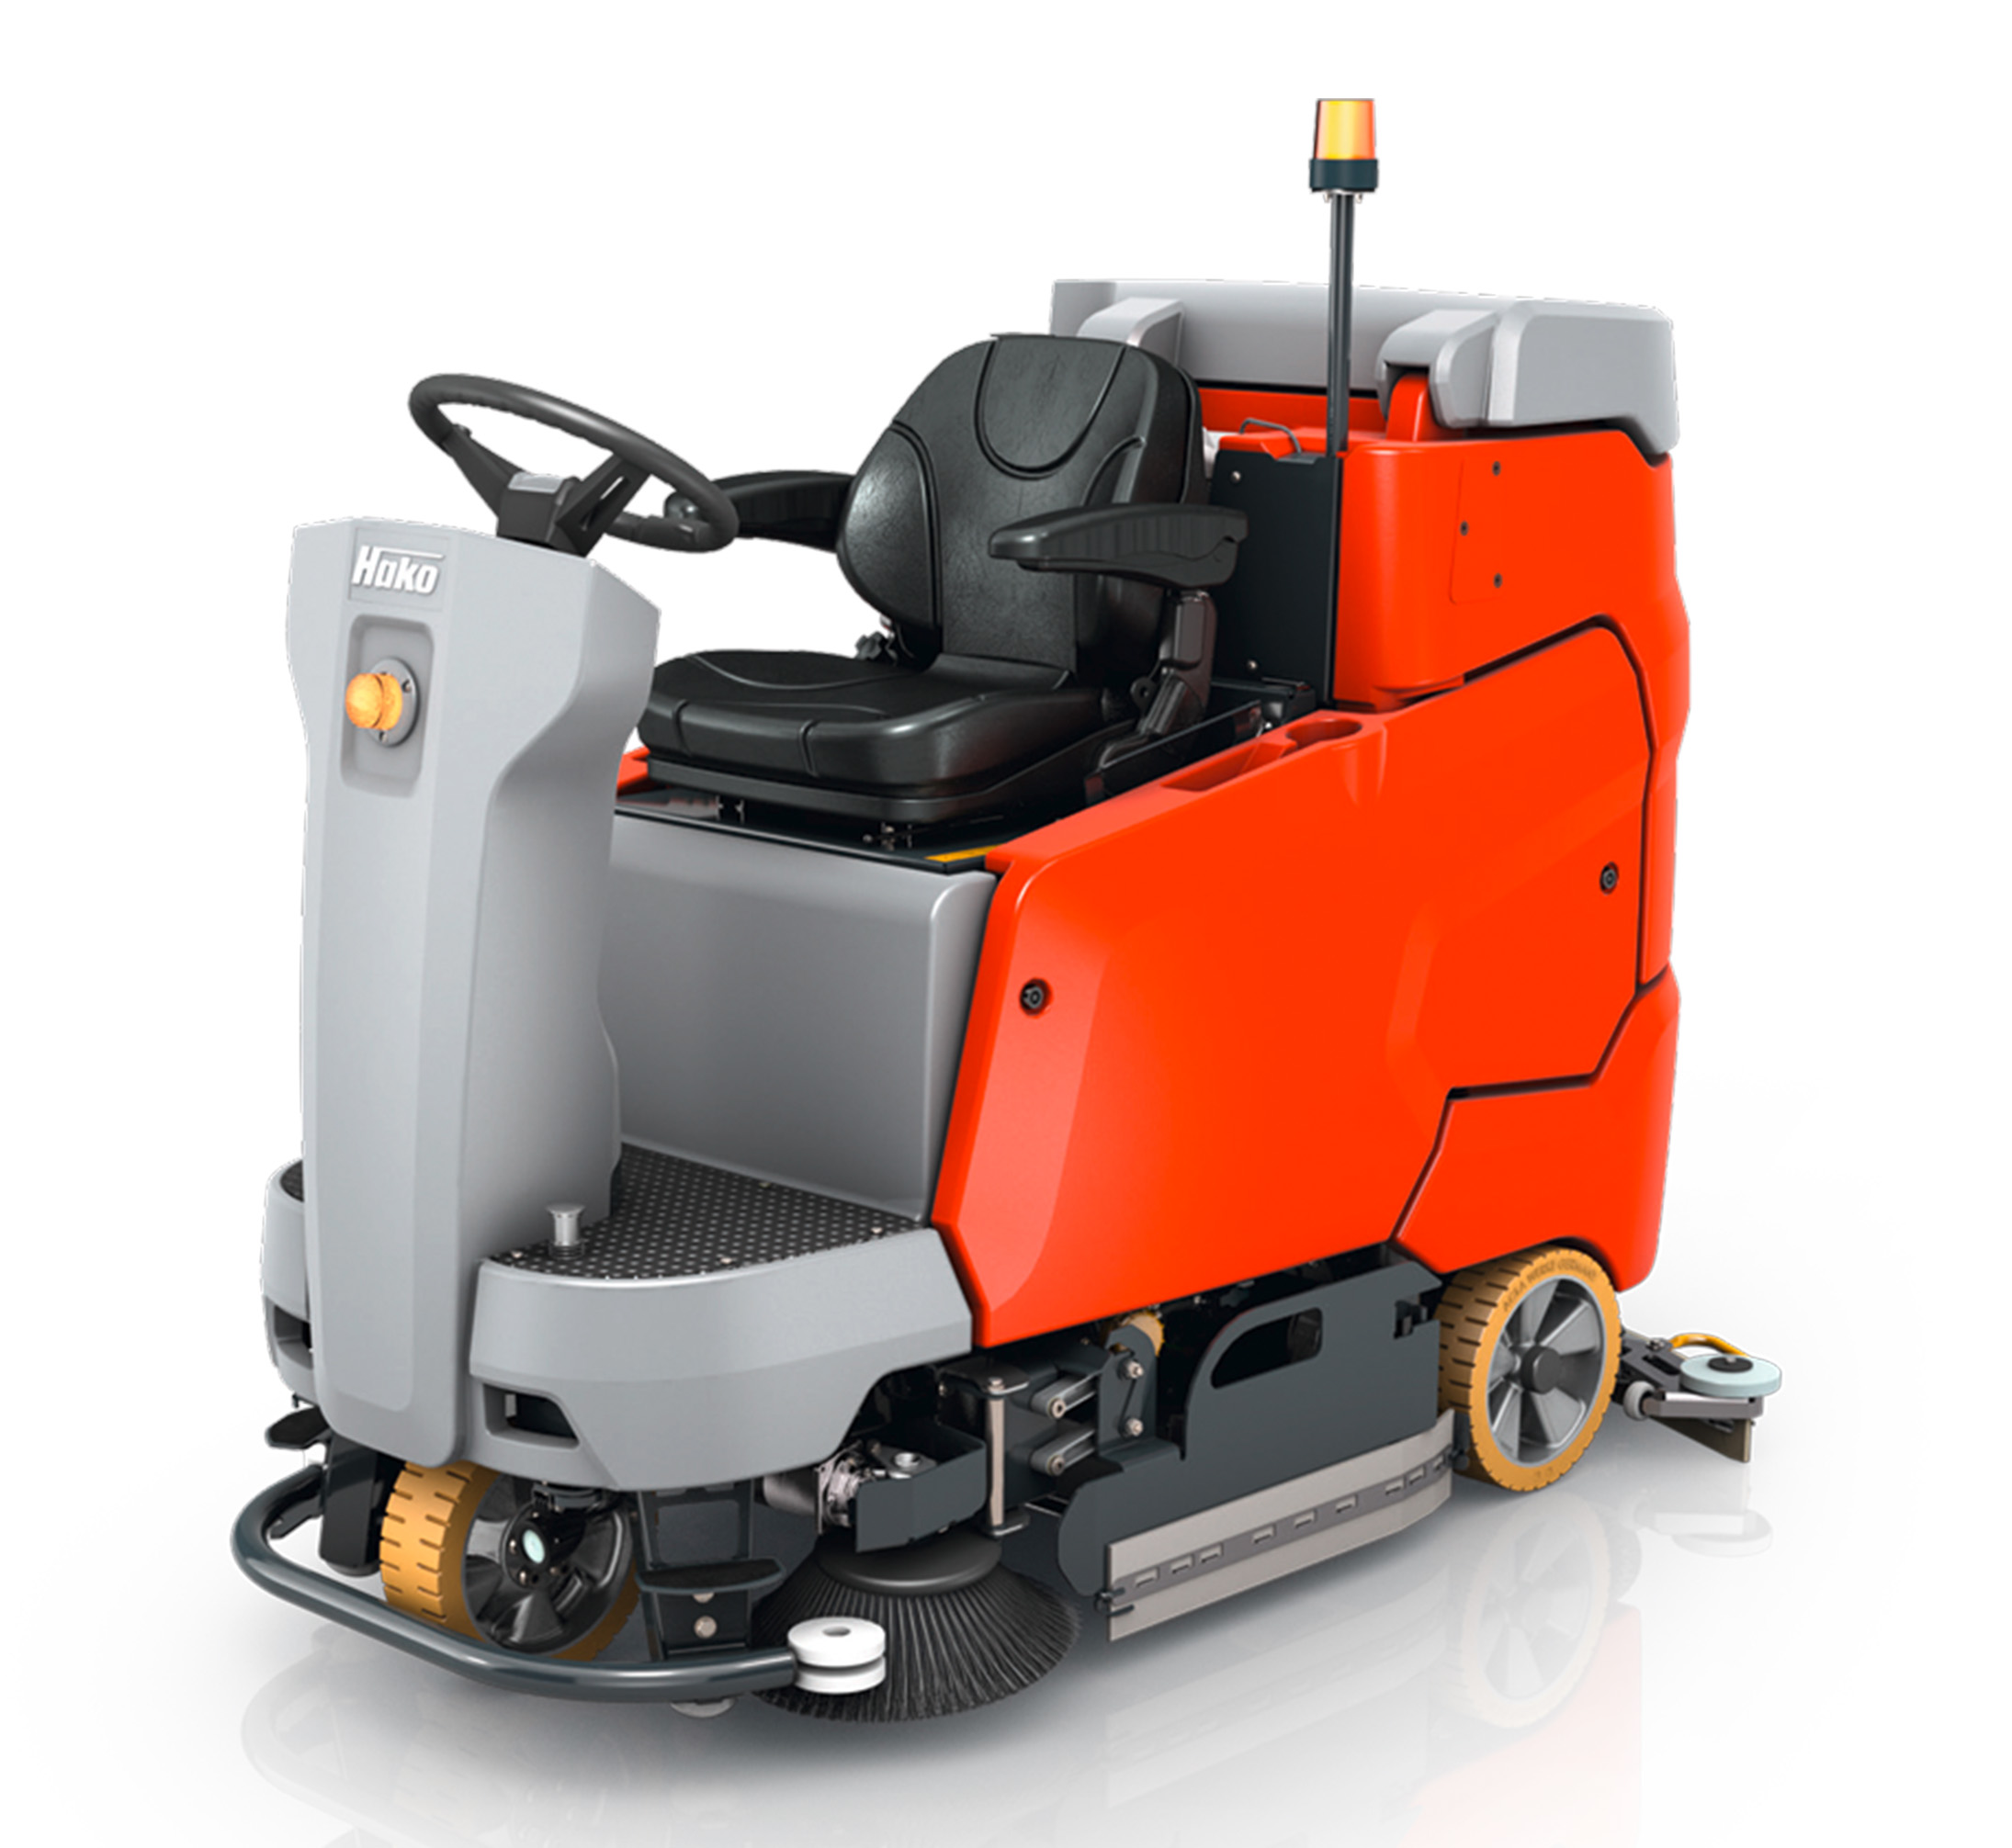 Scrubmaster B175 R Industrial Battery Electric Ride-on Floor Scrubber